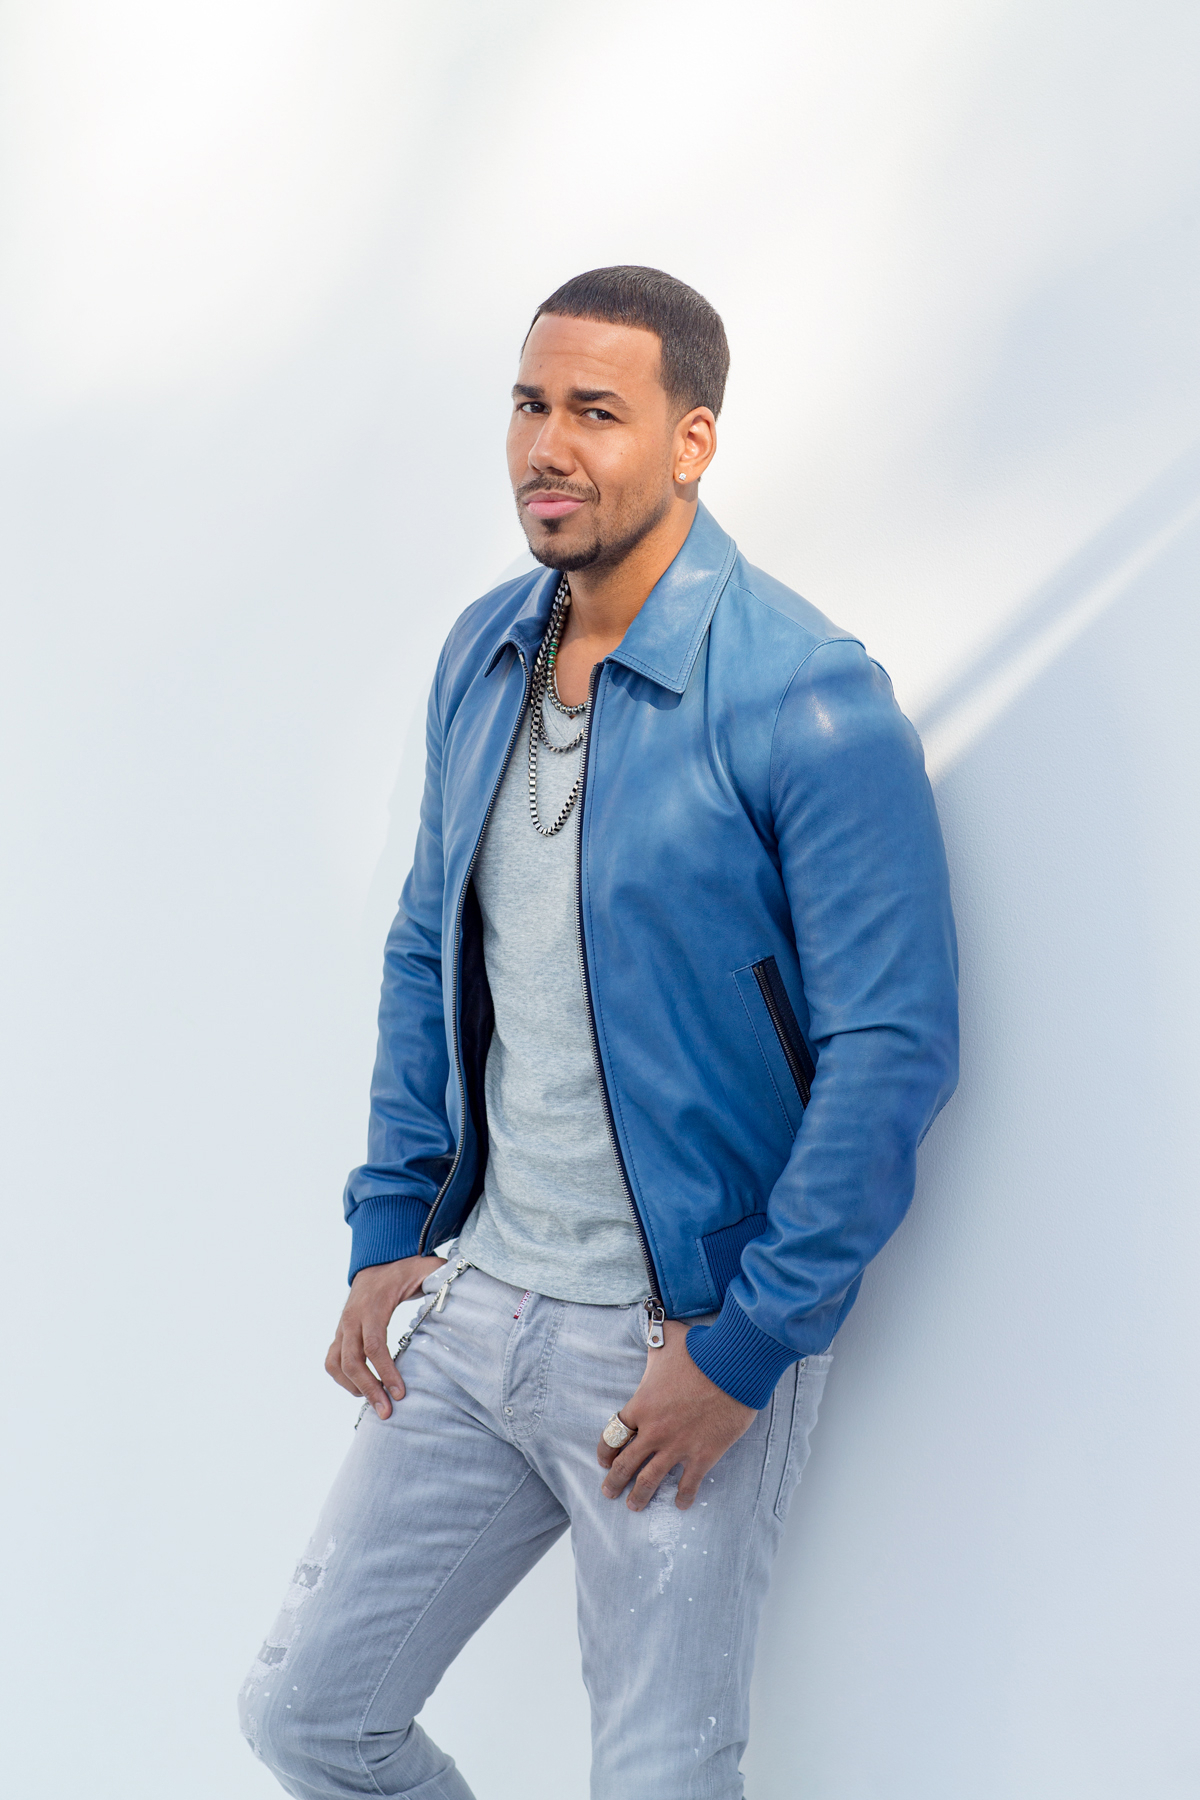 Romeo Santos, The Fast and the Furious Wiki